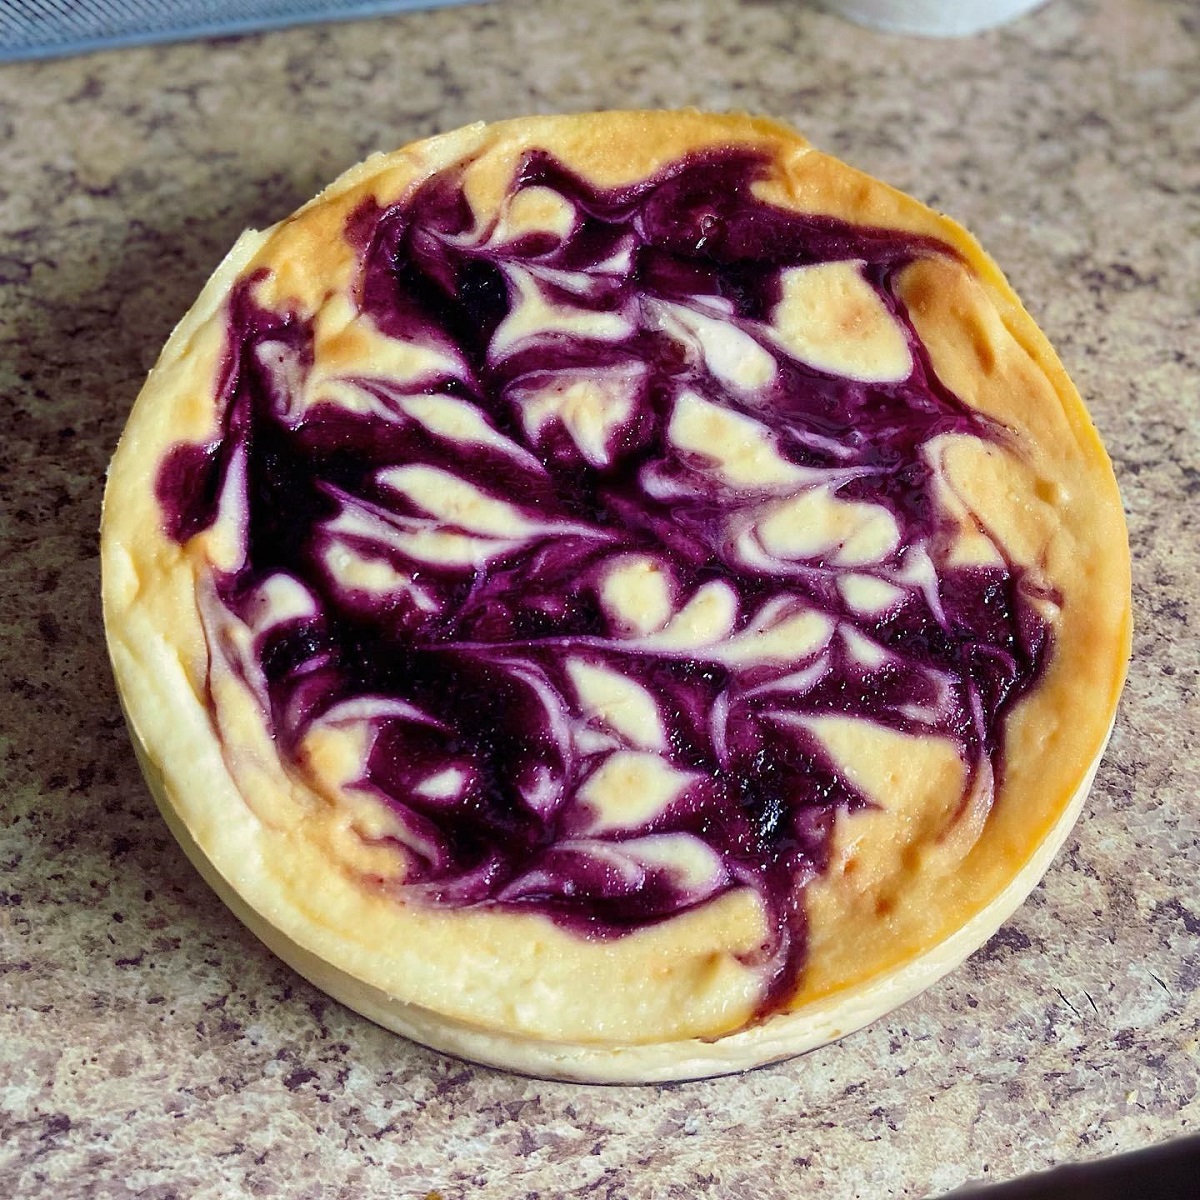 A Blueberry Cheesecake I Made A Few Months Back. Big Hit With My Boyfriend